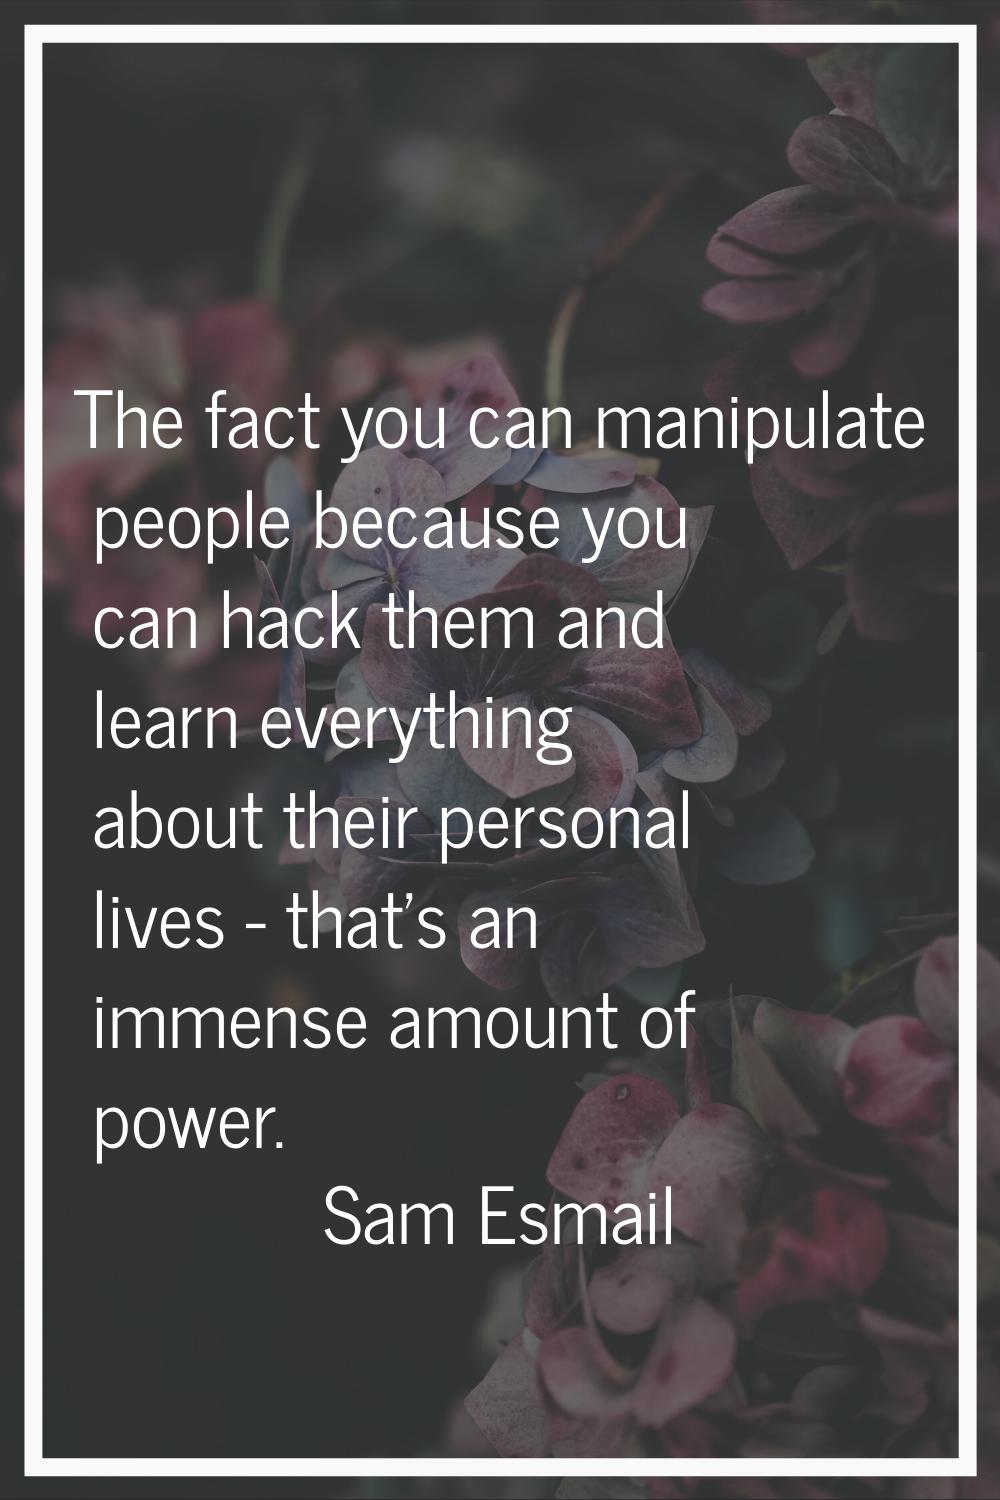 The fact you can manipulate people because you can hack them and learn everything about their perso